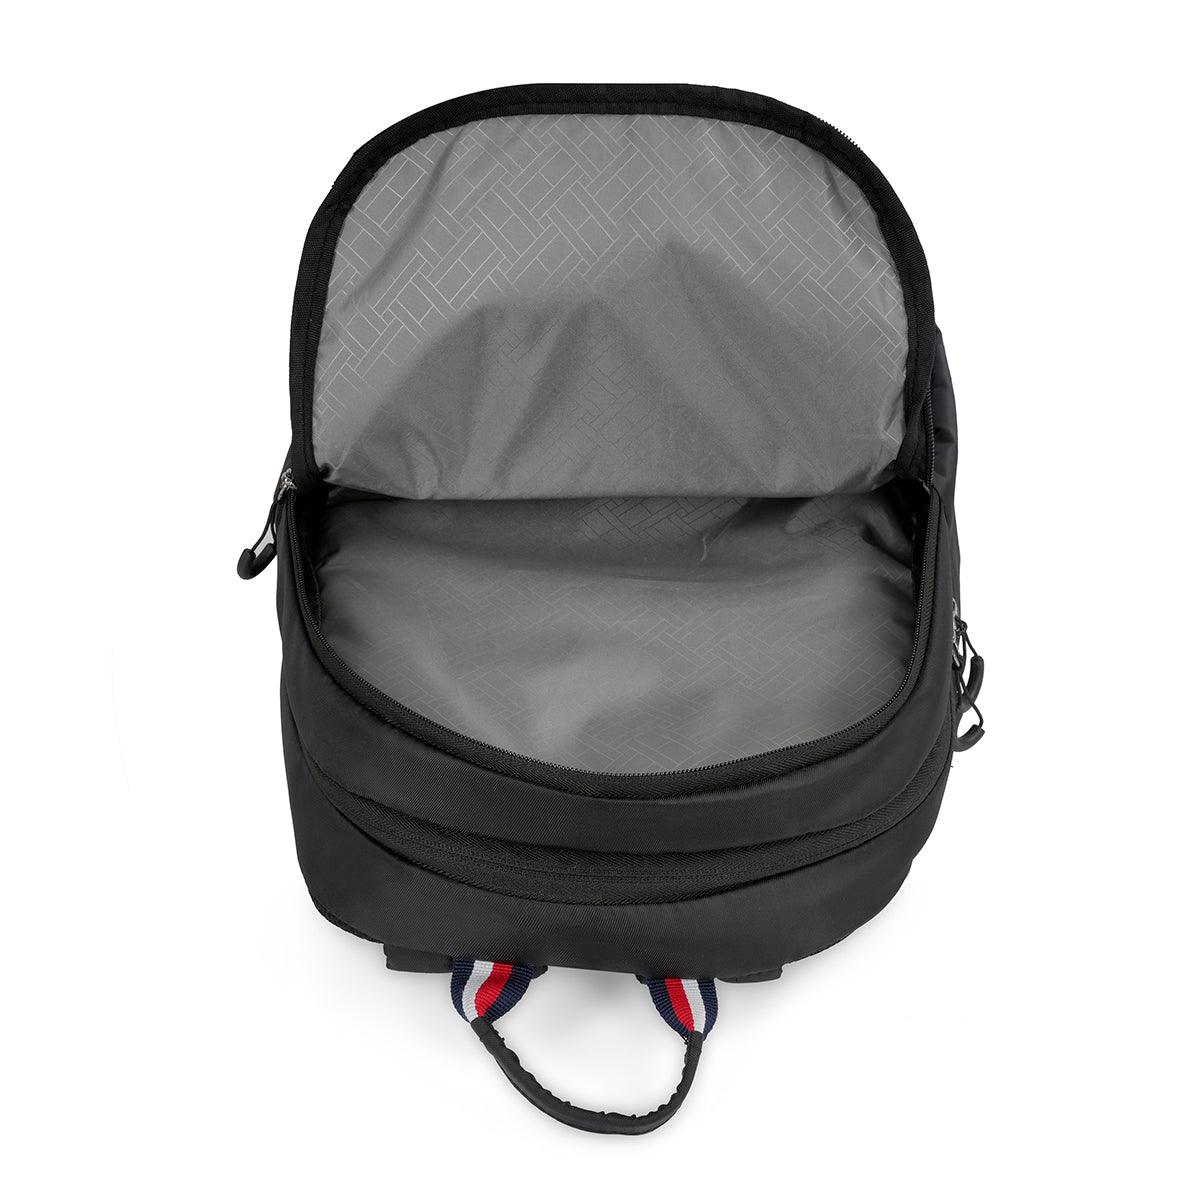 Tommy Hilfiger Pinocchio Back to School Backpack Black